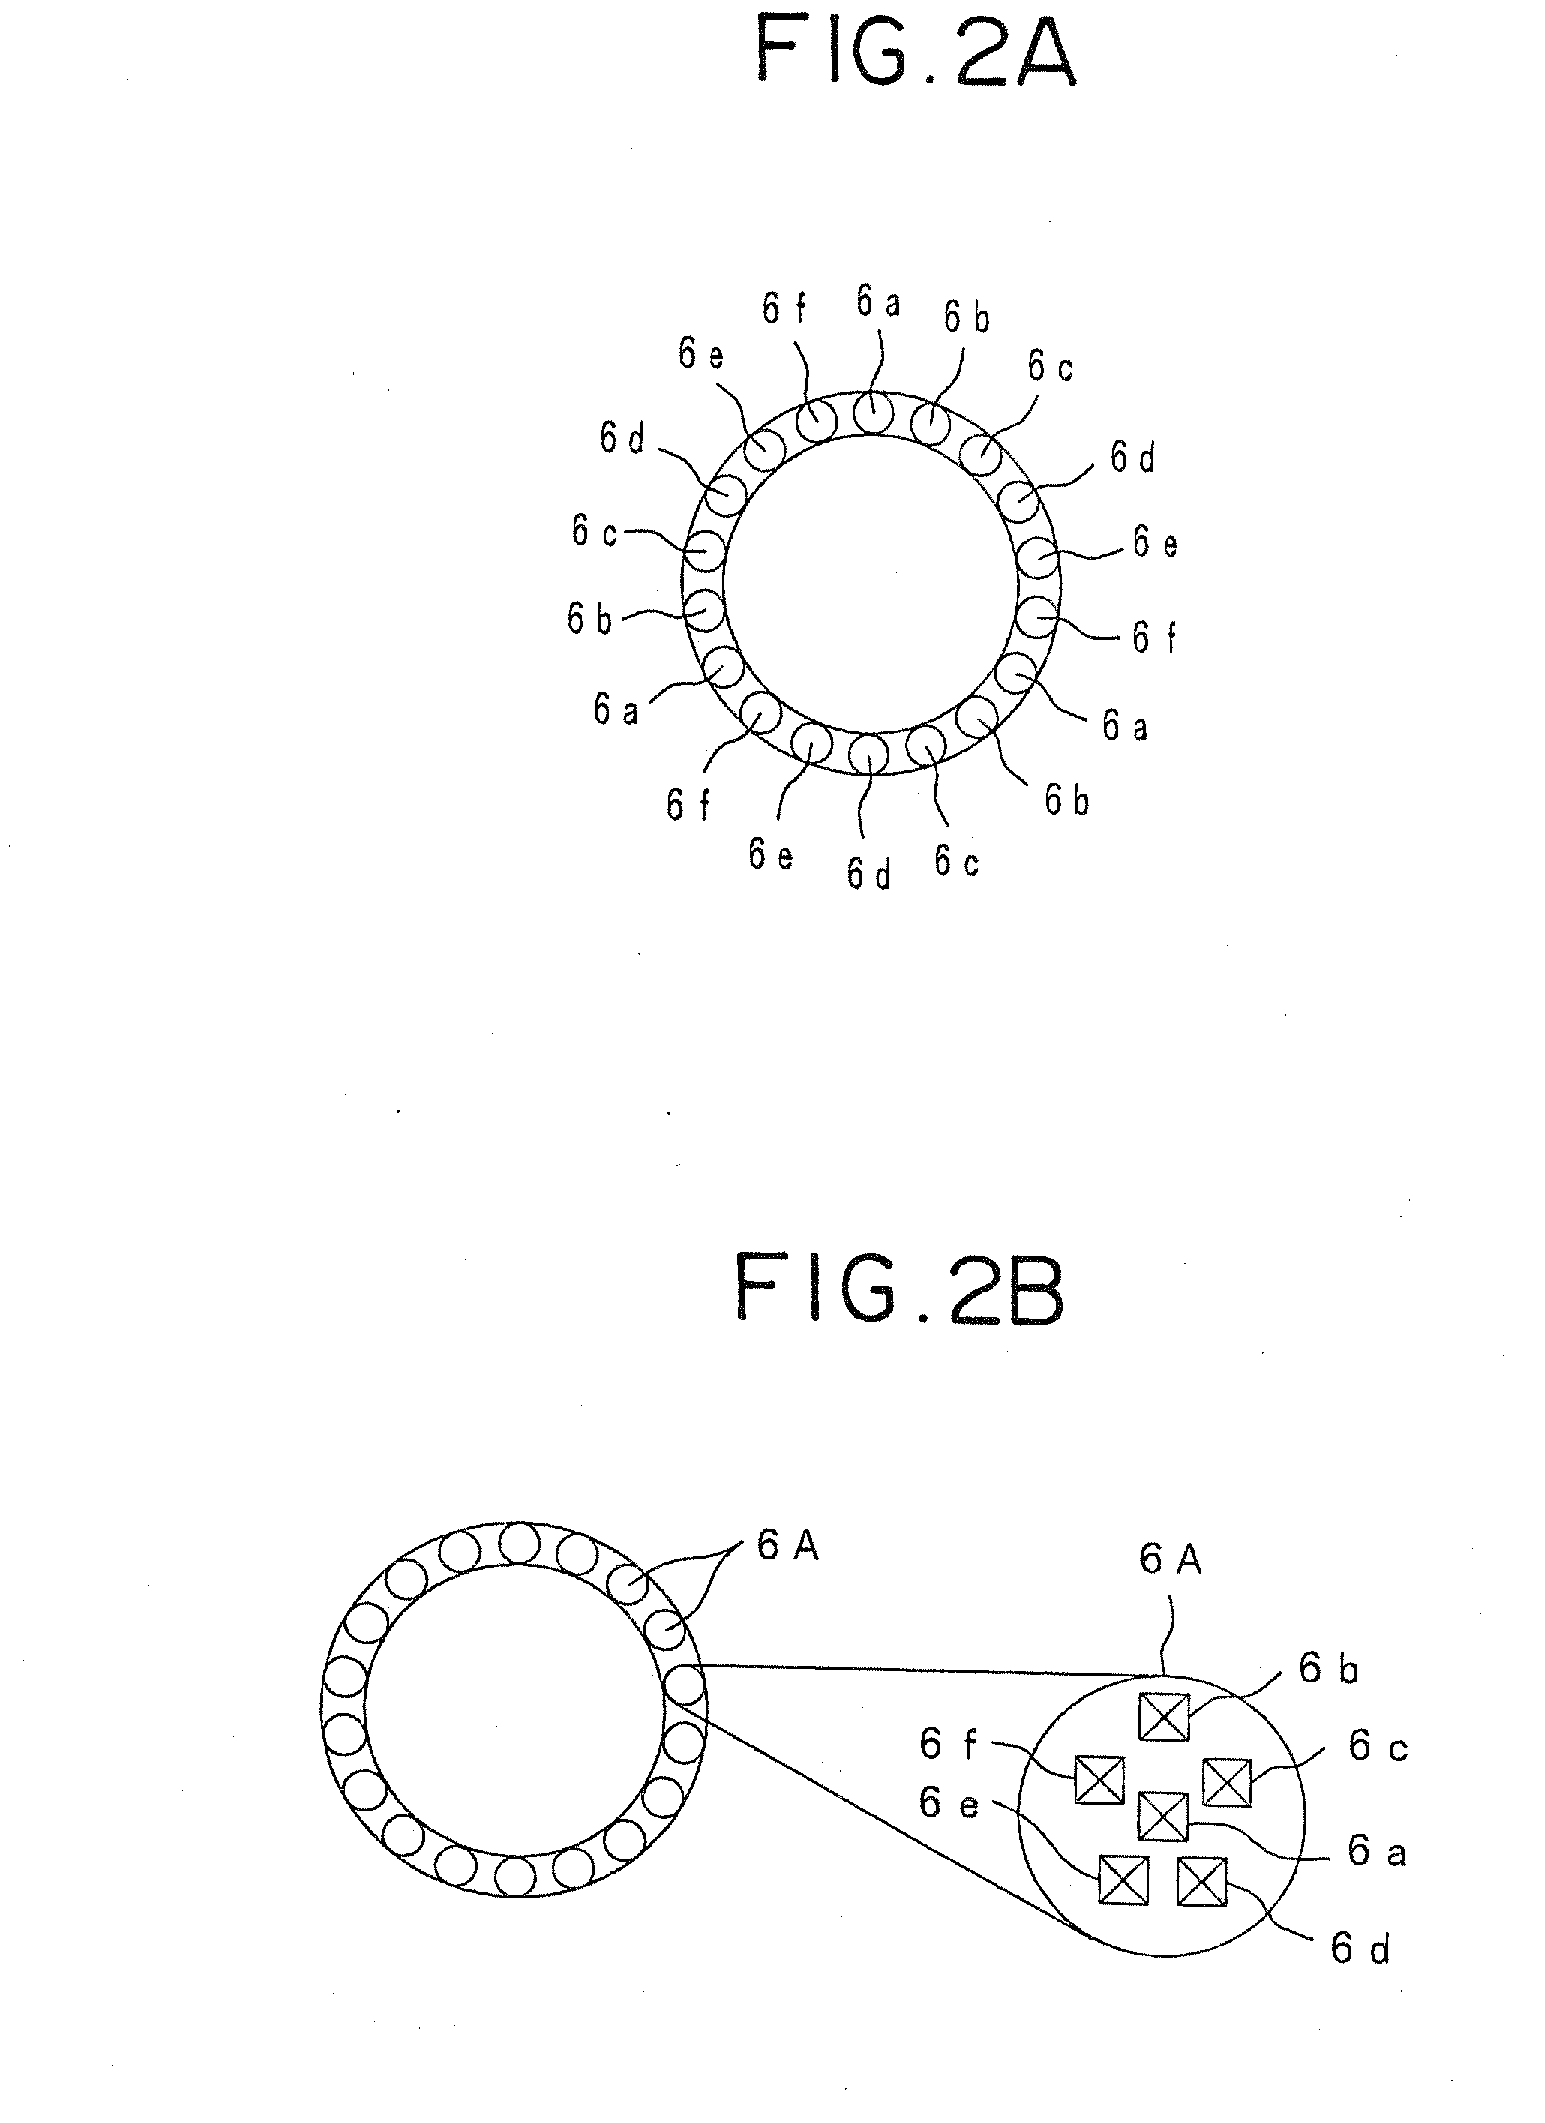 Image processing system and camera